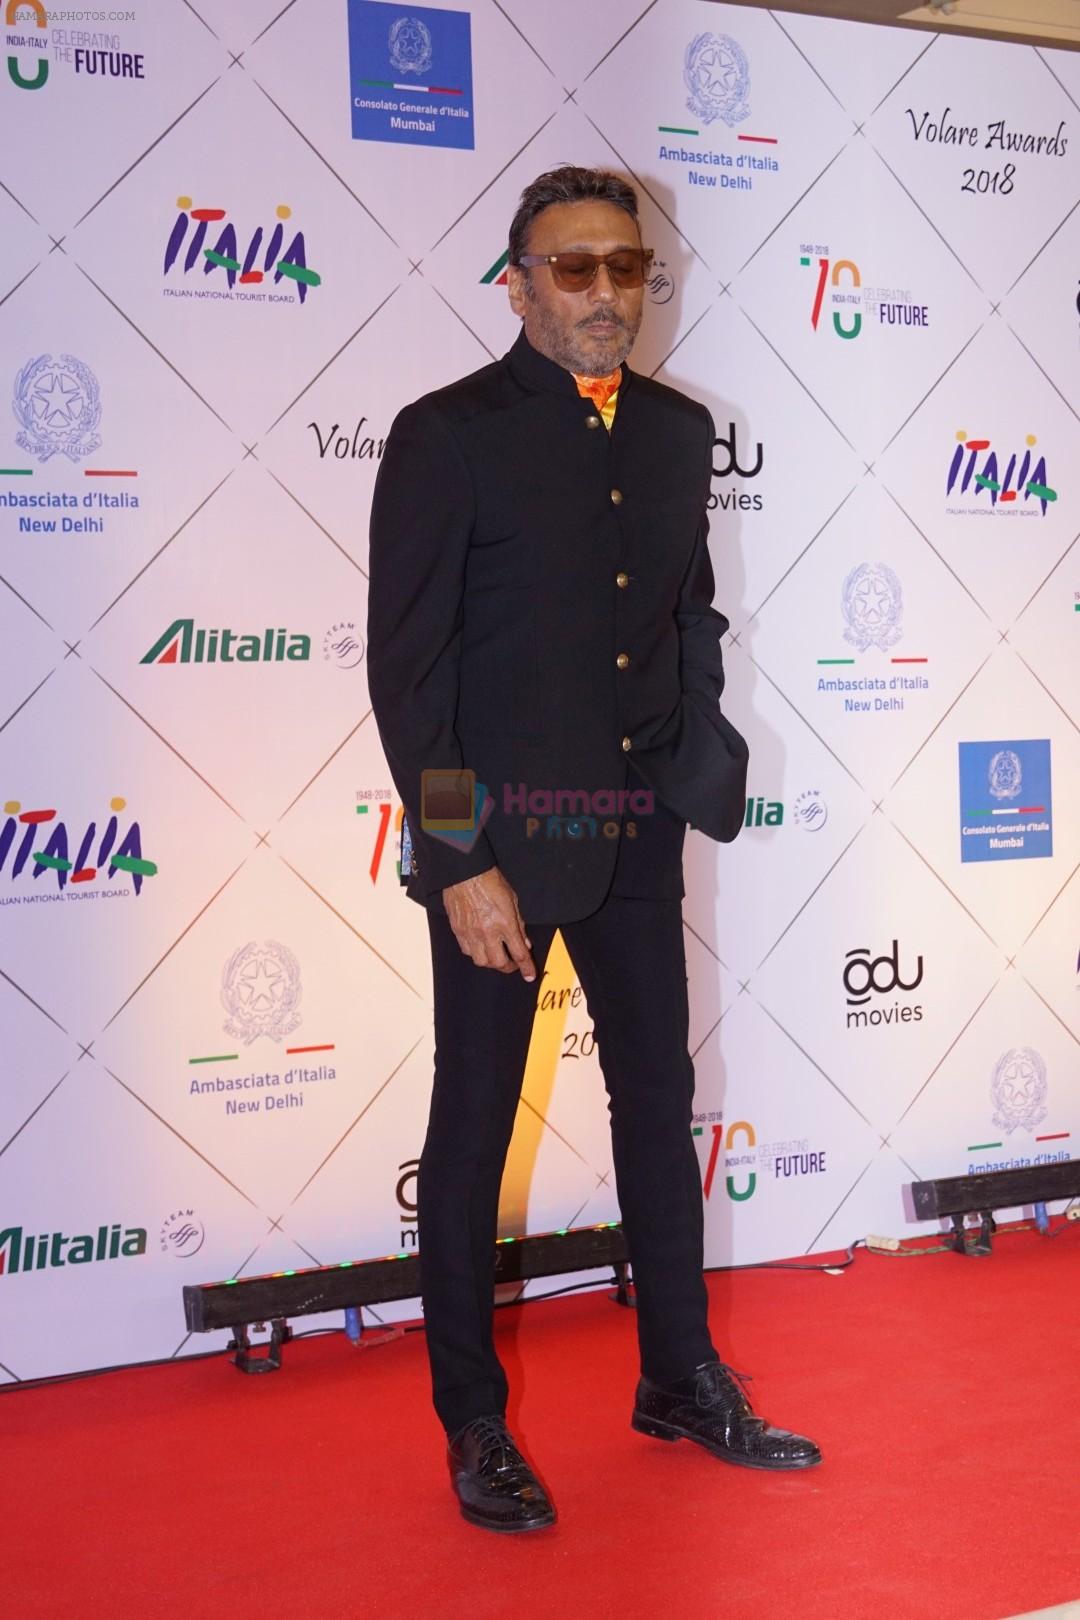 Jackie Shroff at Red Carpet Of Volare Awards 2018 on 9th Feb 2018